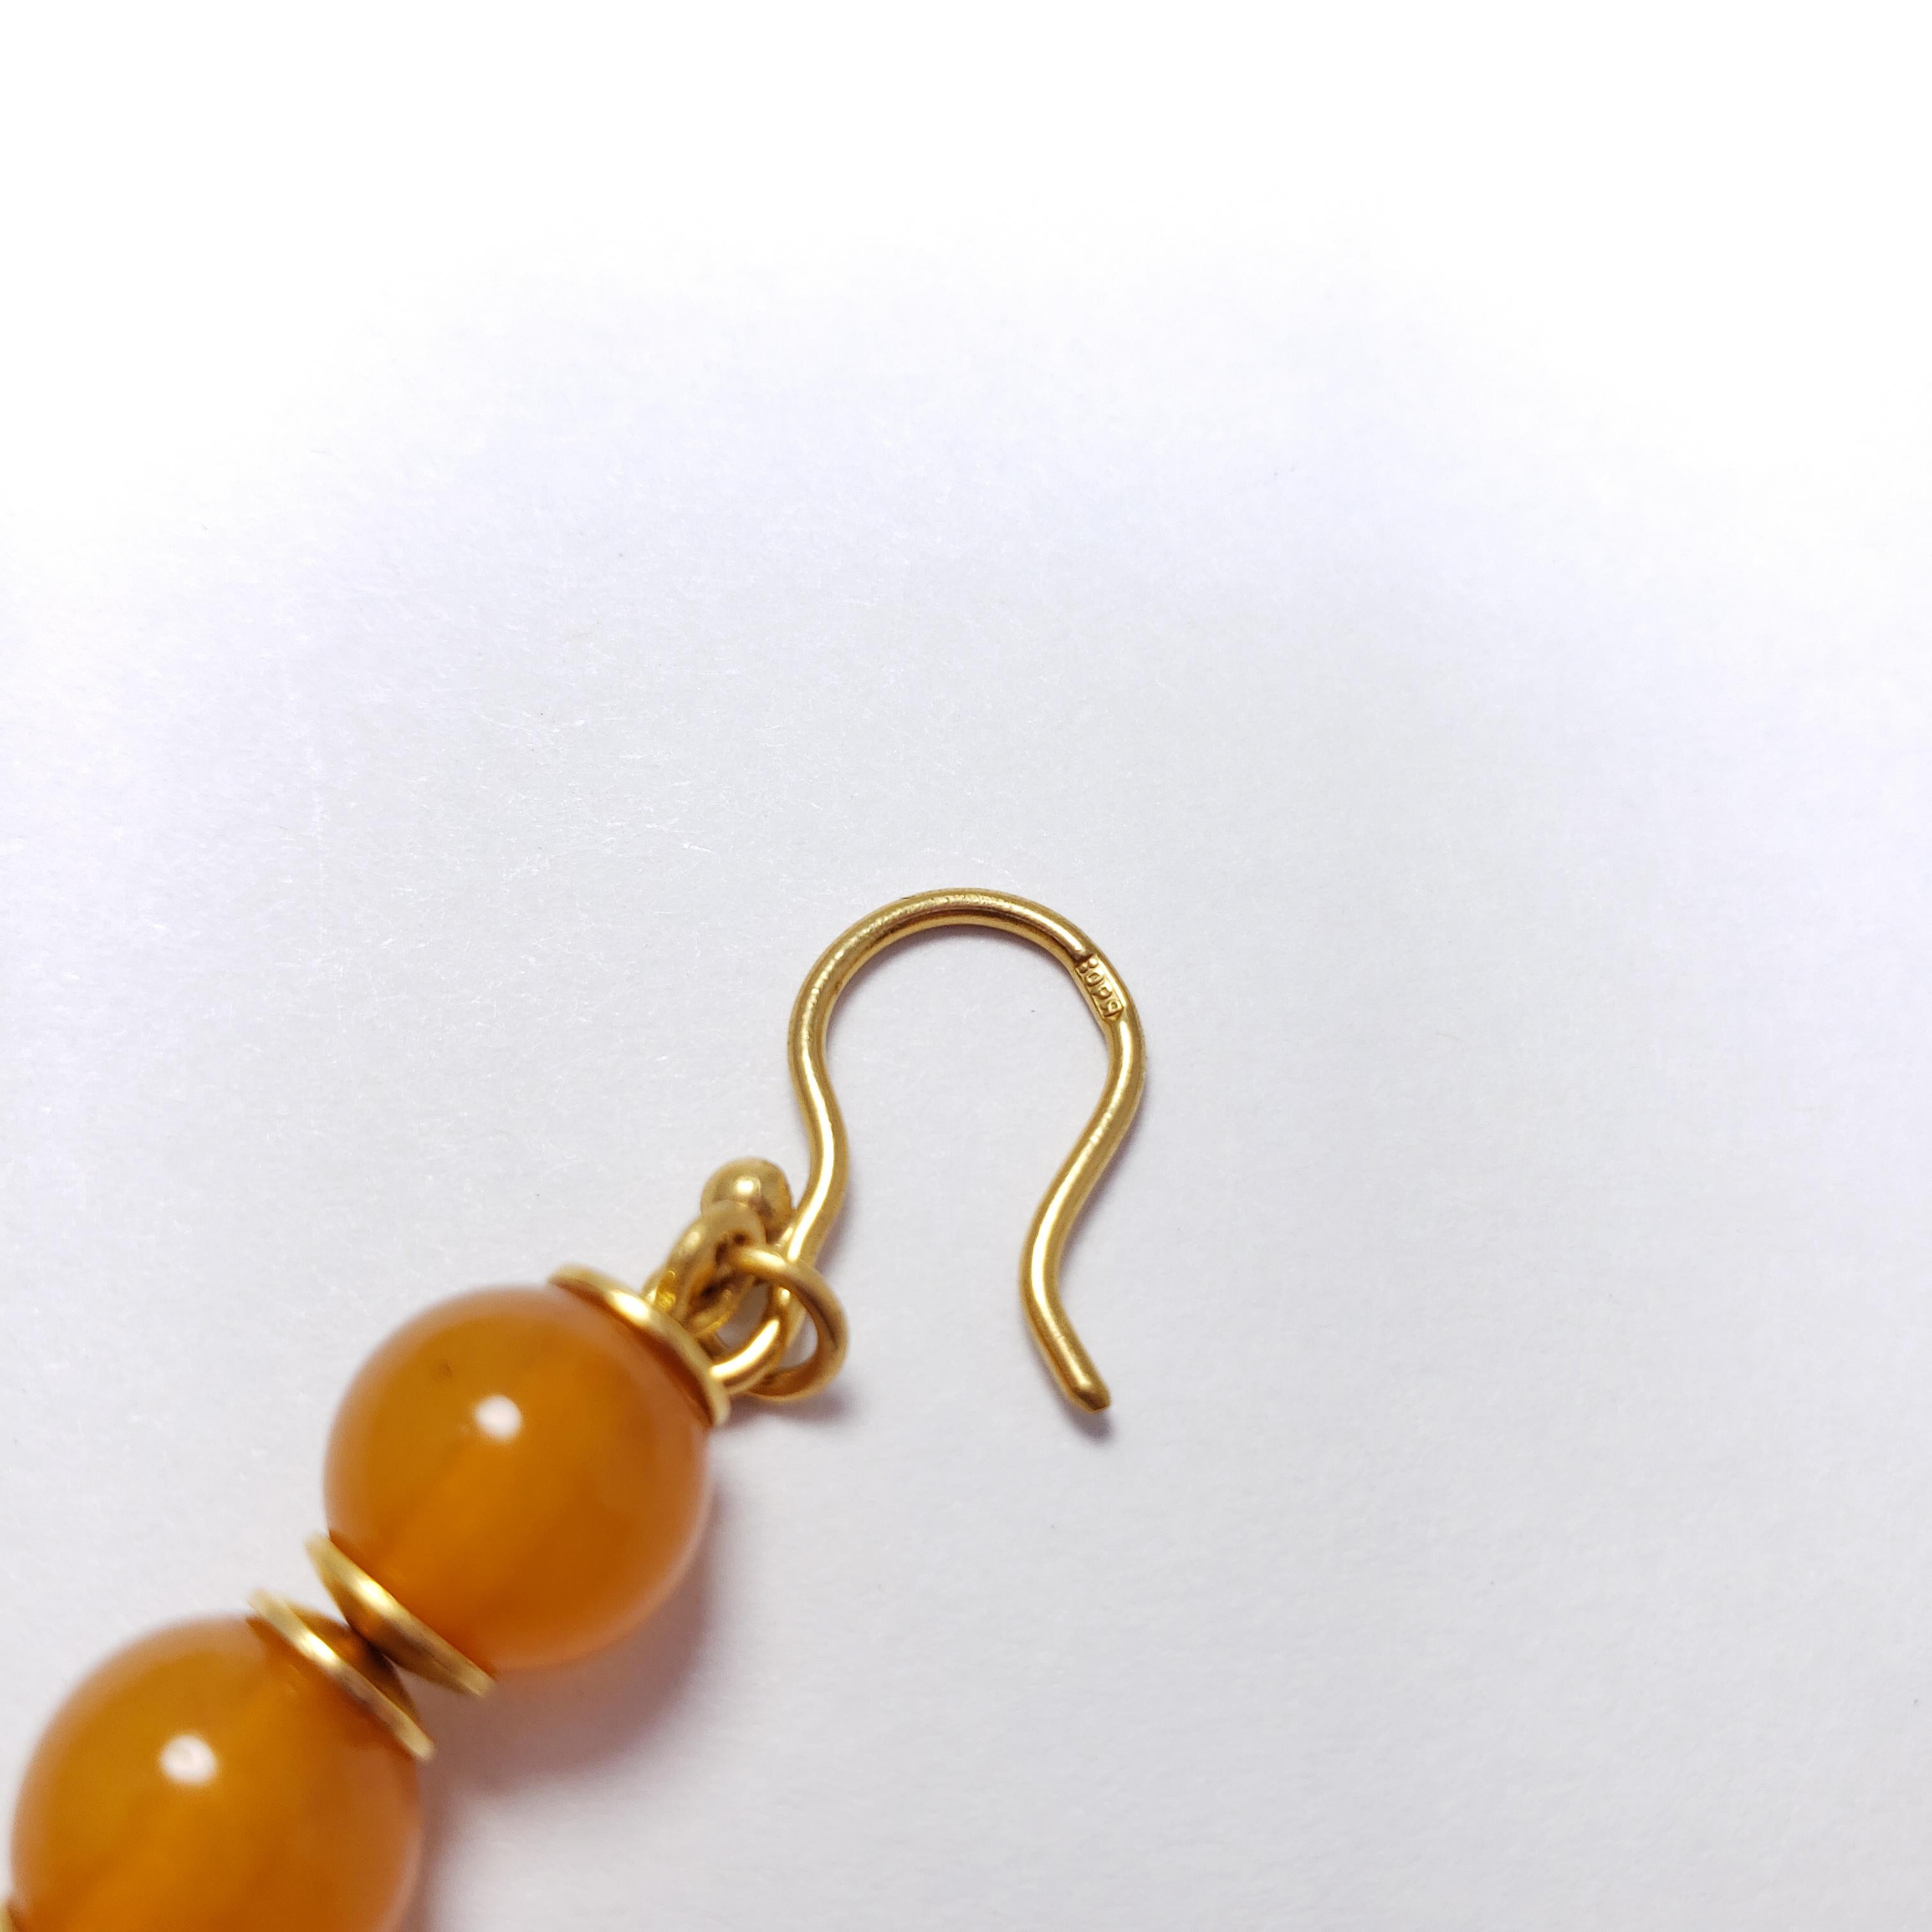 Russian Orange Baltic Amber Bead Dangling Earrings in Gold, Early to Mid 1900s 1